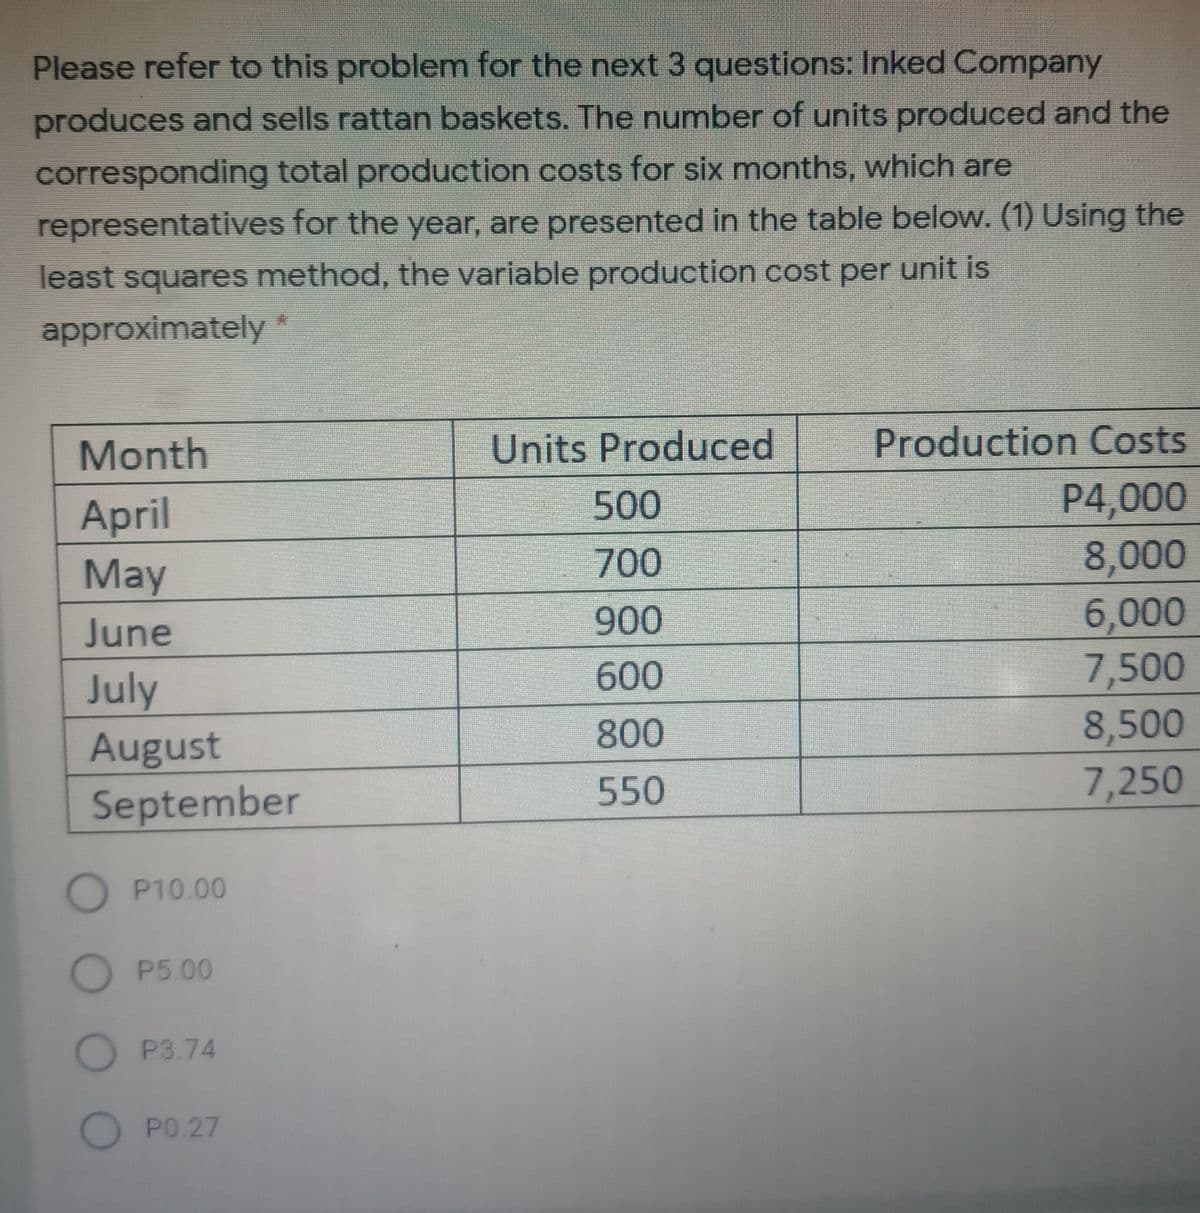 Please refer to this problem for the next 3 questions: Inked Company
produces and sells rattan baskets. The number of units produced and the
corresponding total production costs for six months, which are
representatives for the year, are presented in the table below. (1) Using the
least squares method, the variable production cost per unit is
approximately
Month
Units Produced
Production Costs
P4,000
8,000
April
500
May
700
6,000
7,500
June
900
July
600
800
8,500
August
550
7,250
September
O P10.00
OP5.00
P3.74
P0.27
